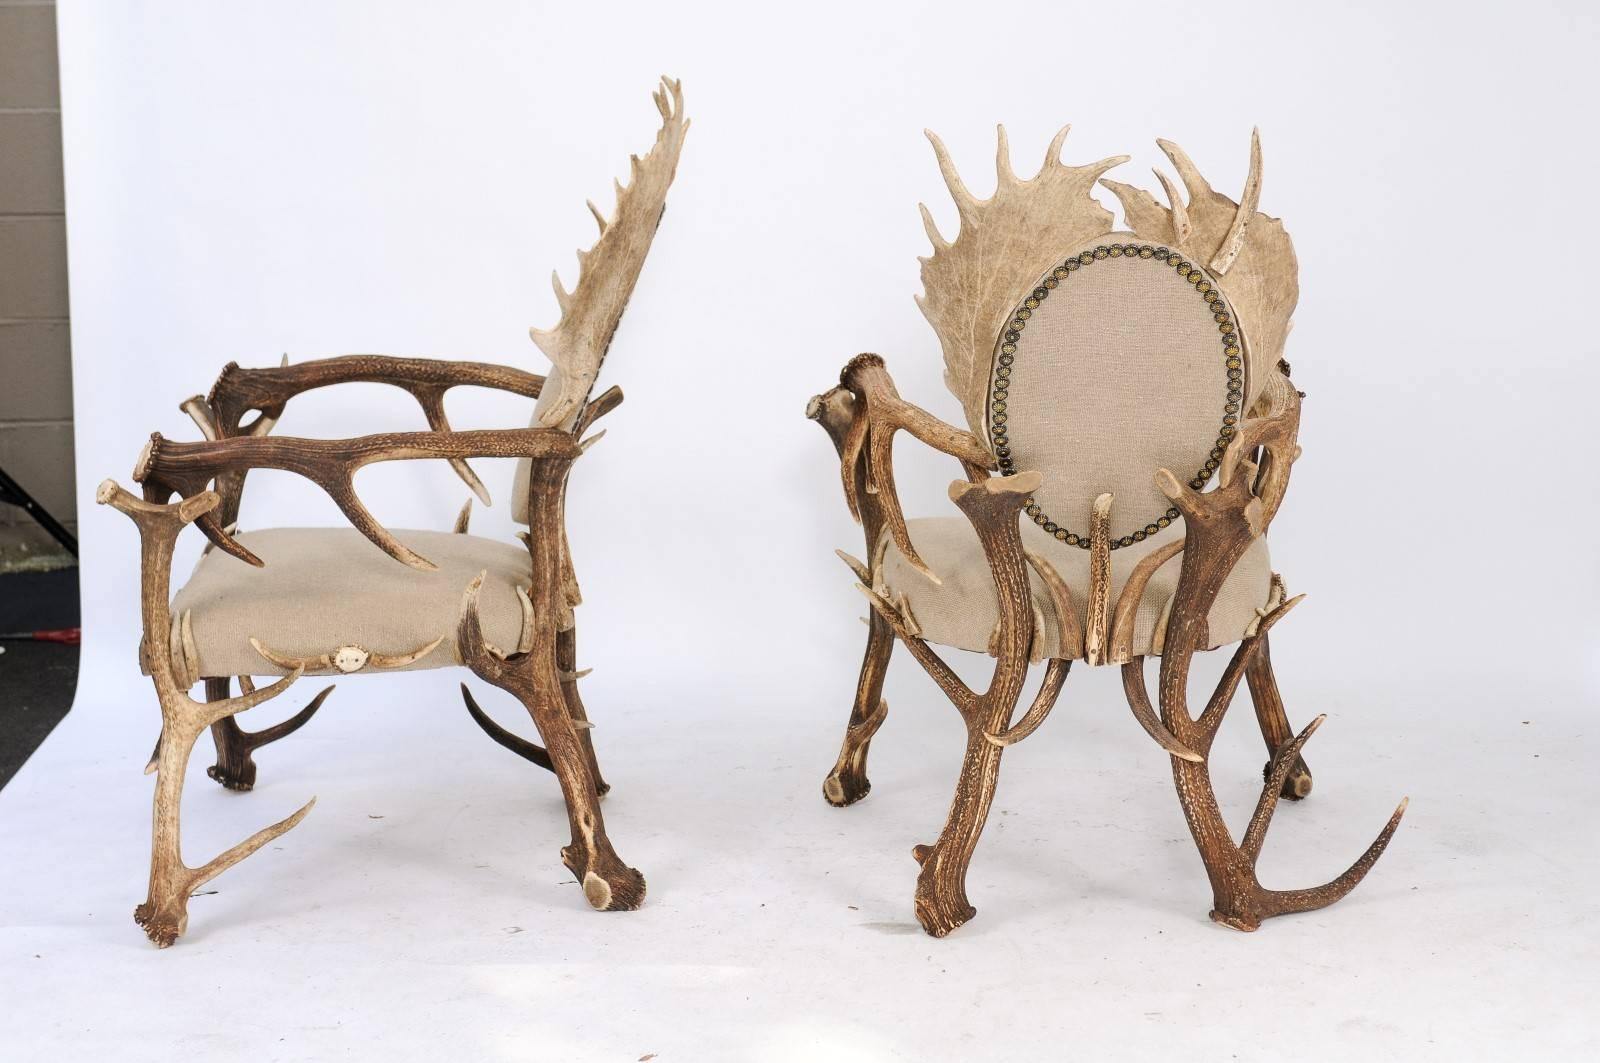 Pair of French authentic antler built armchairs, upholstered in linen with oval backs flanked by striking moose antlers. When we realized the artistic craft involved in making a pair of armchairs with all natural antlers that were as handsome as